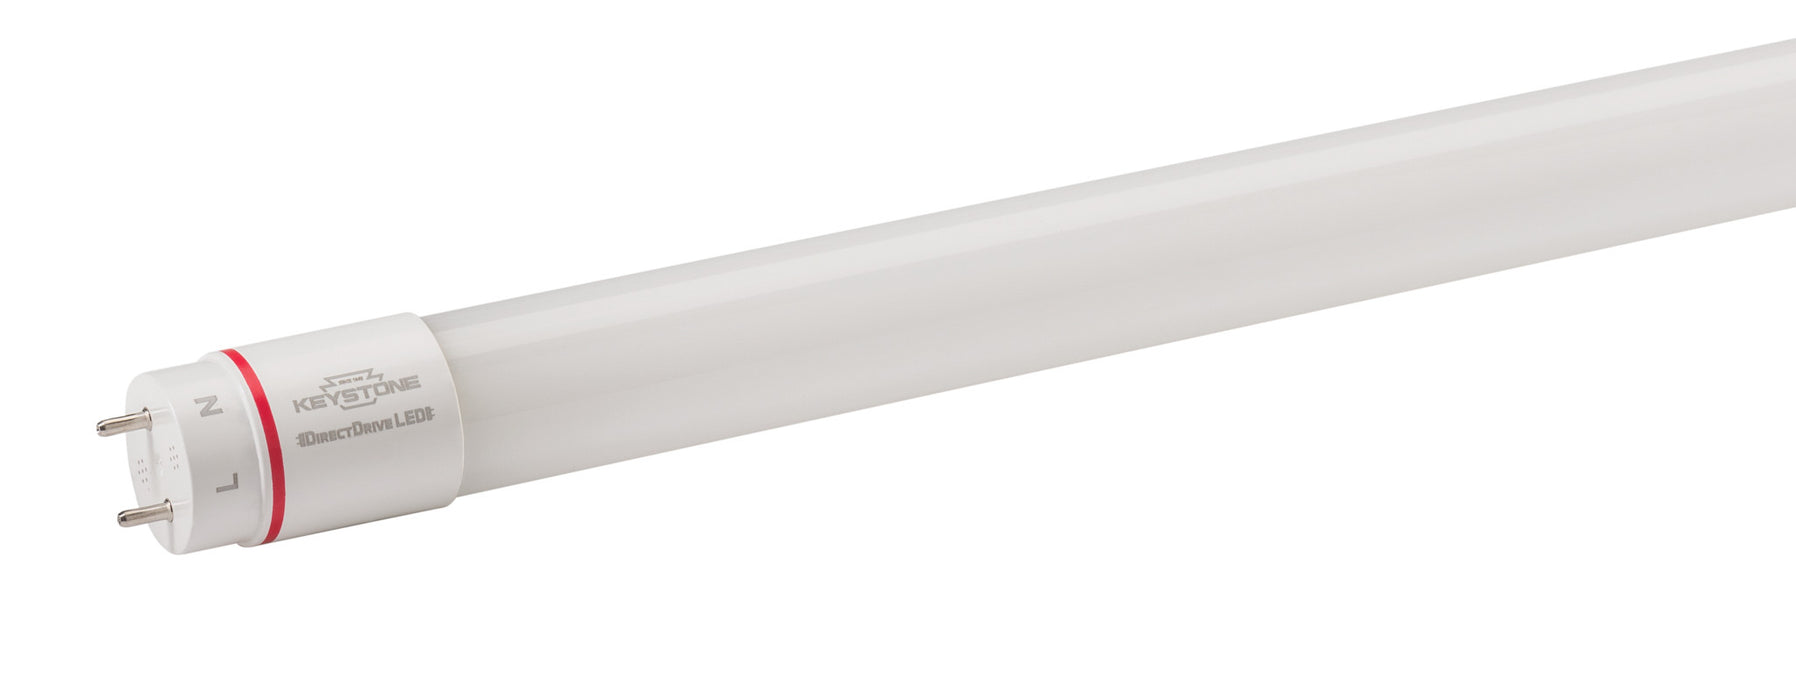 Keystone 15W LED T8 Tube 2200Lm Glass Construction 4 Foot 3500K 120-277V Input Direct Drive Double Ended Wiring Only Generation 2 (KT-LED15T8-48G-835-D2 /G2)